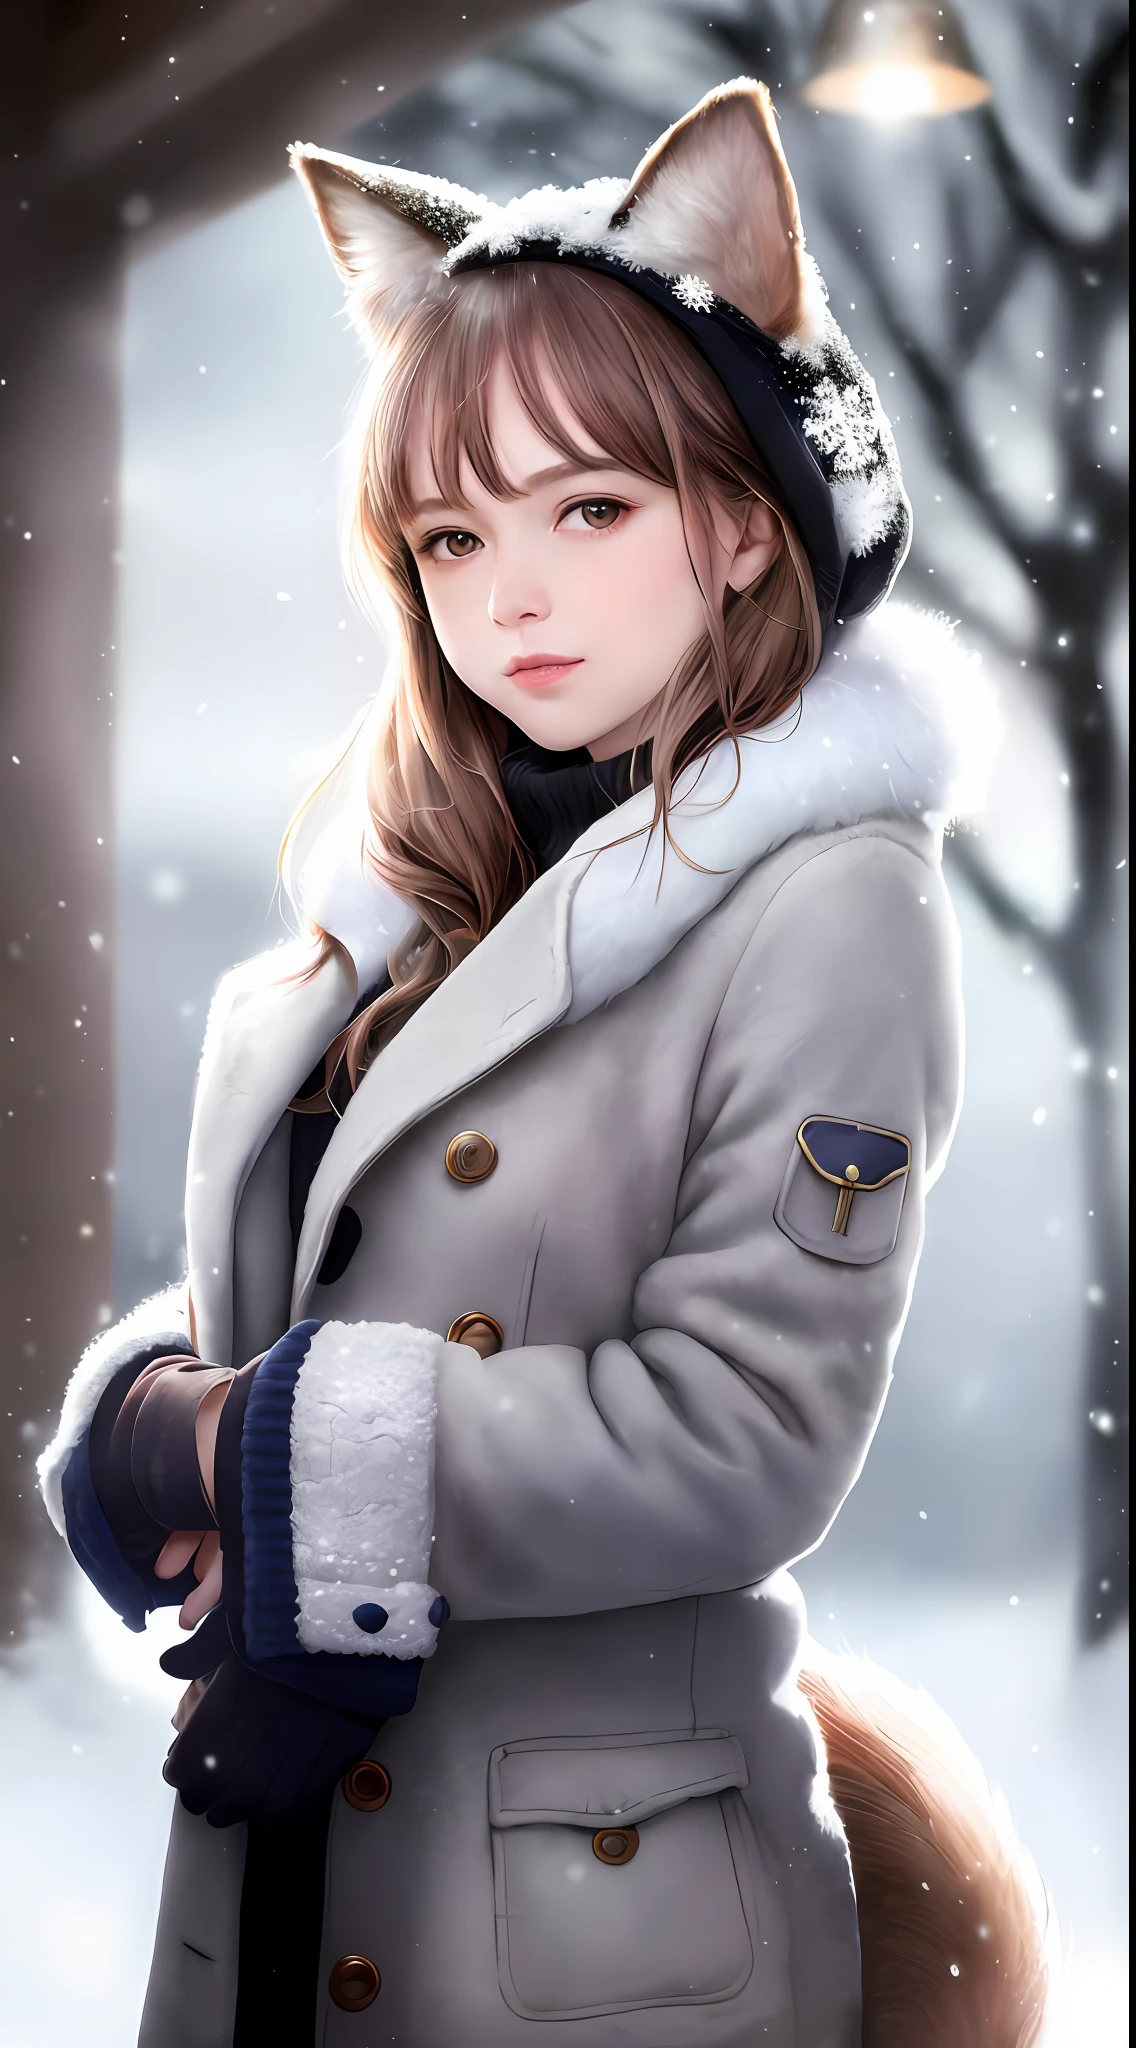 (raw photo:1.2), (photorealistic:1.4), (best quality:1.4), (ultra highres:1.2), (highly detailed:1.3), (HDR:1.2), (cinematic lighting:1.3), (detailed eyes), (facial details), (fur details), (snowy:1.2). ), Cute little fox, standing, (3/4 body portrait: 1.2), (furry tail: 1.2), (soft fur: 1.2), (moe: 1.2), (looking at the audience), (innocent expression), (soft light), (dreamy), (dream: 1.3), (ethereal: 1.3), (magic: 1.2), (snowflake: 1.2), (winter wonderland: 1.3), (whimsical: 1.2), (fun: 1.2), some accessories, busts, solo